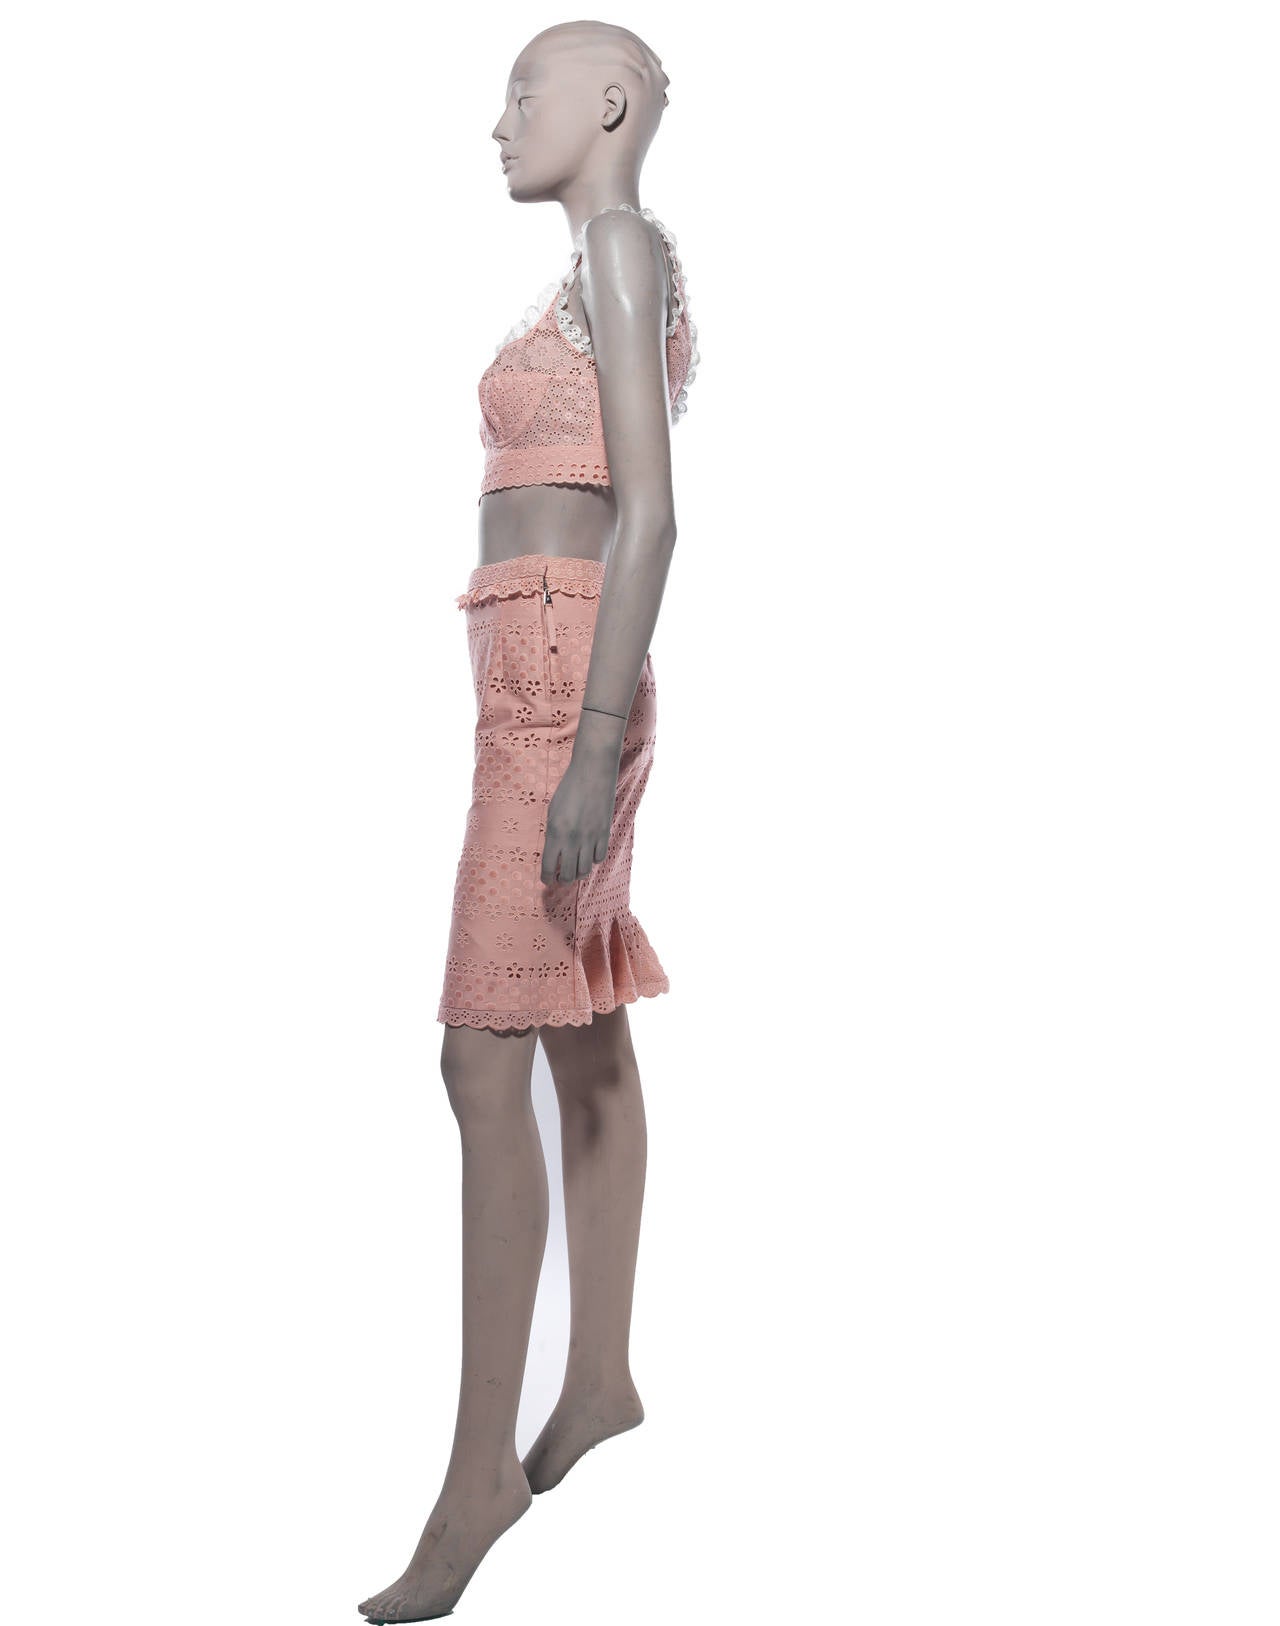 Louis Vuitton Spring 2012, pink and white eyelet skirt set; top features a crop fit, padded bust and back hook closure; skirt features bottom hem pleats and side zip closure.

Top- Bust 30”, Length 15”; Skirt– Waist 28”, Hip 34”, Length